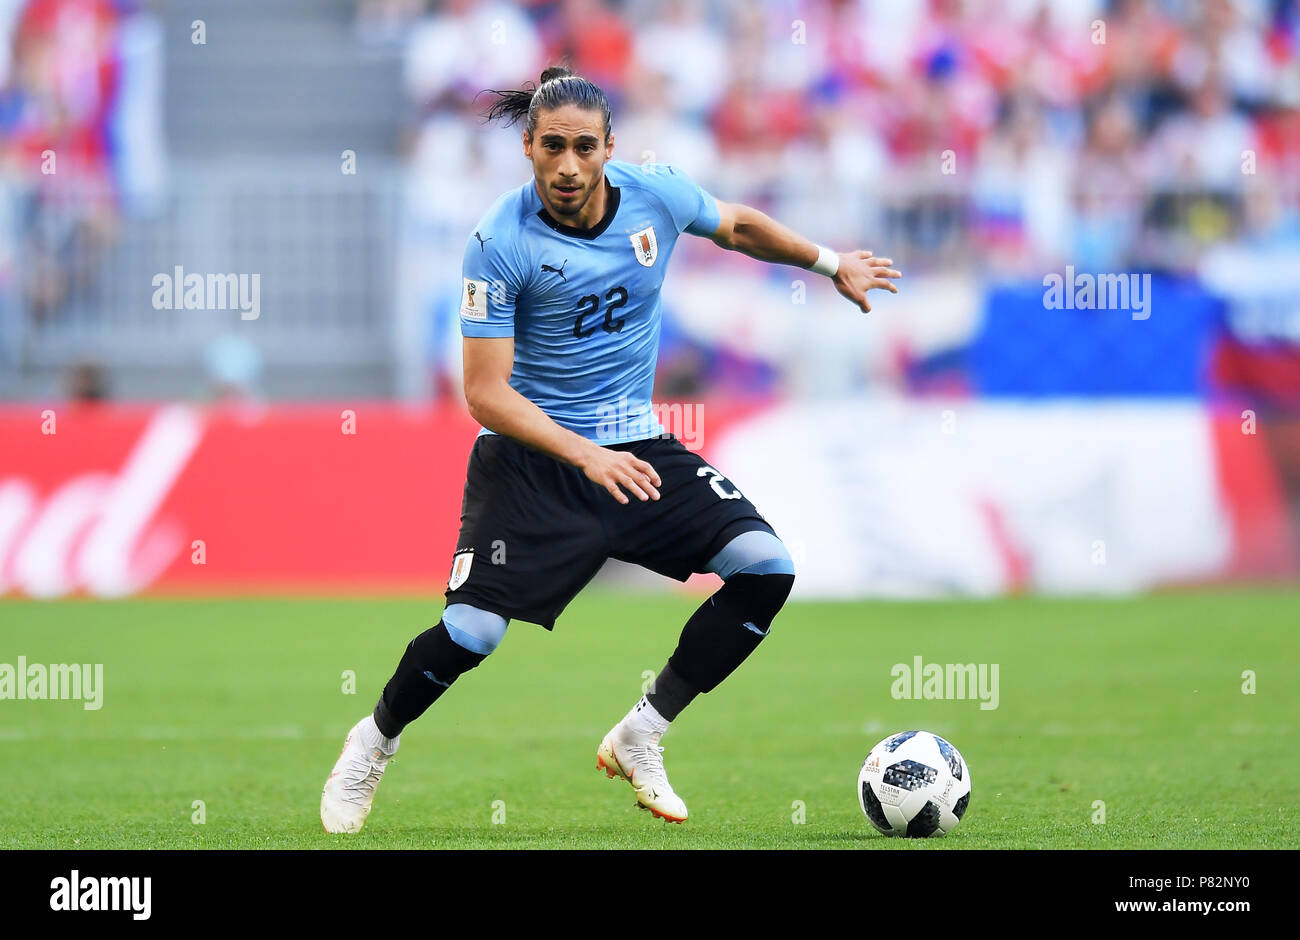 SAMARA, RUSSIA - JUNE 25: Martin Caceres of Uruguay in action during the 2018 FIFA World Cup Russia group A match between Uruguay and Russia at Samara Arena on June 25, 2018 in Samara, Russia. (Photo by Lukasz Laskowski/PressFocus/MB Media) Stock Photo